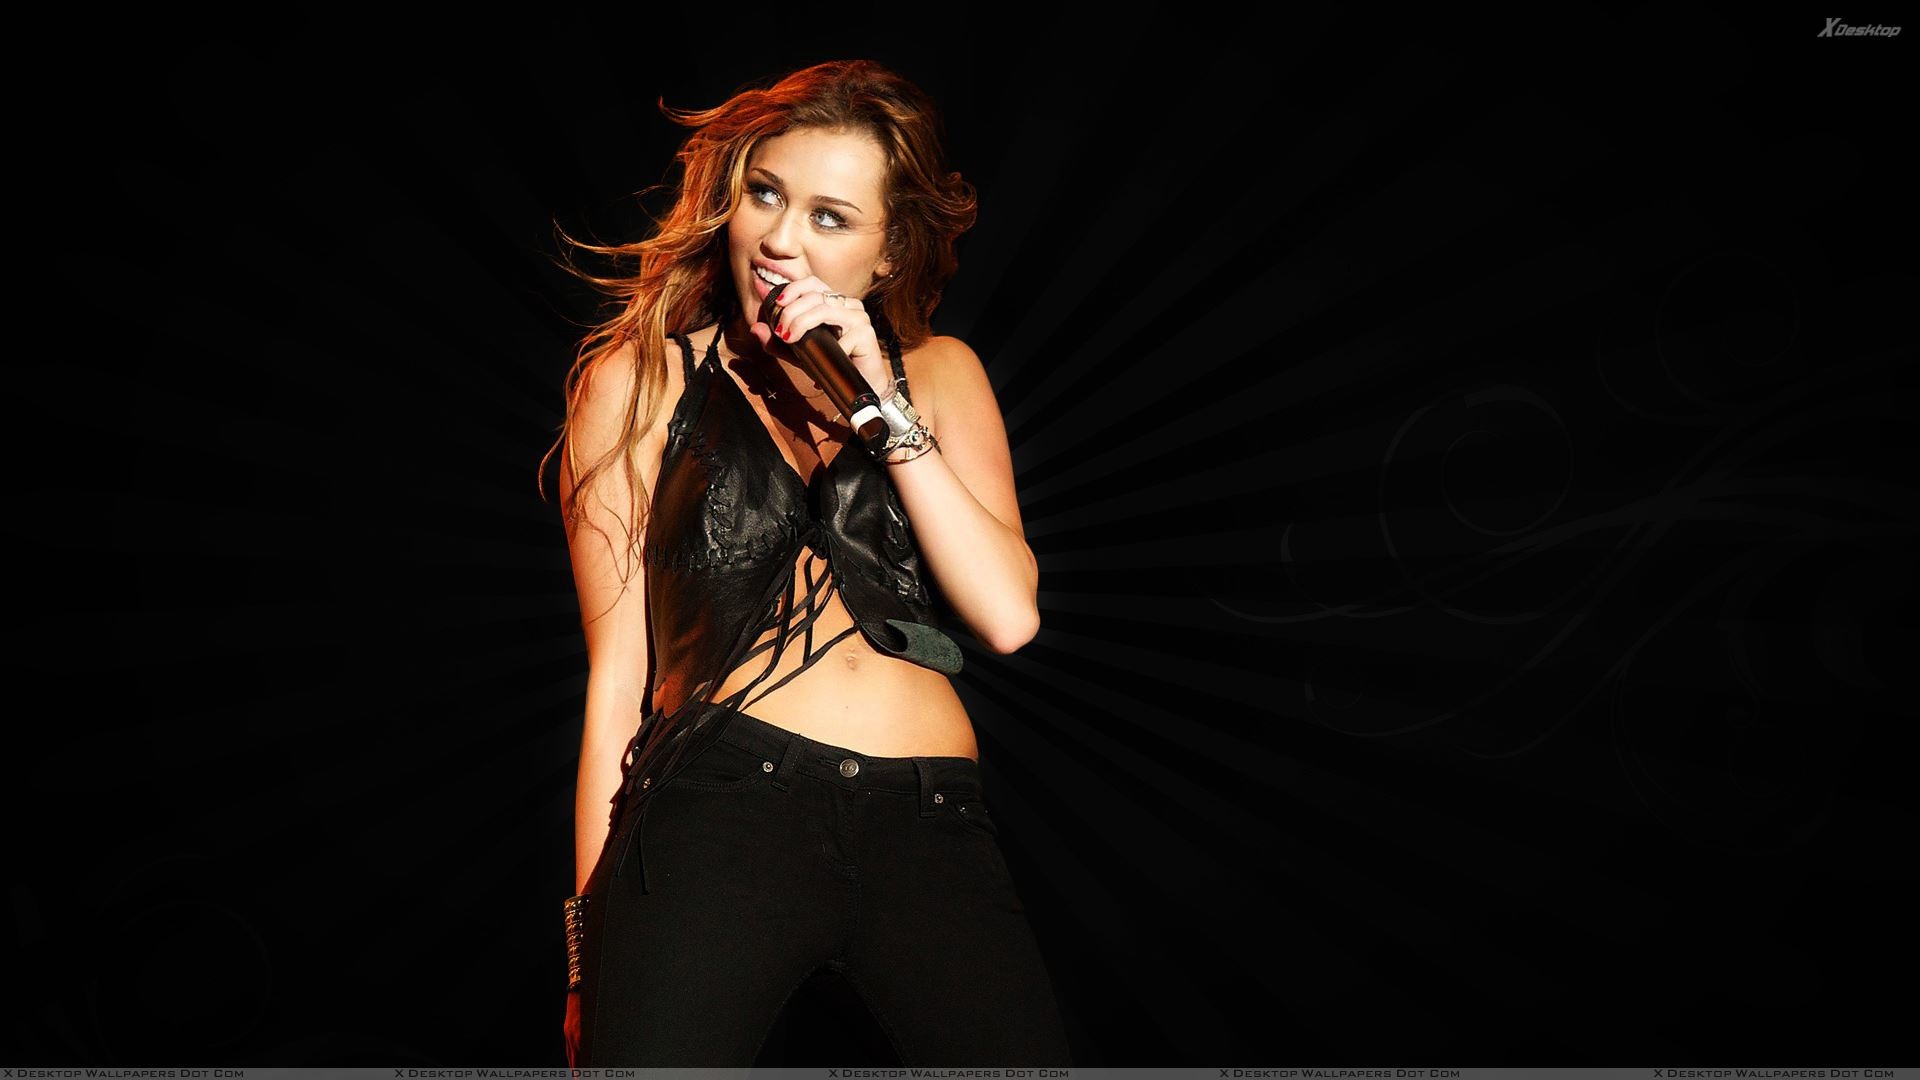 1920x1080 You are viewing wallpaper titled "Miley Cyrus ...